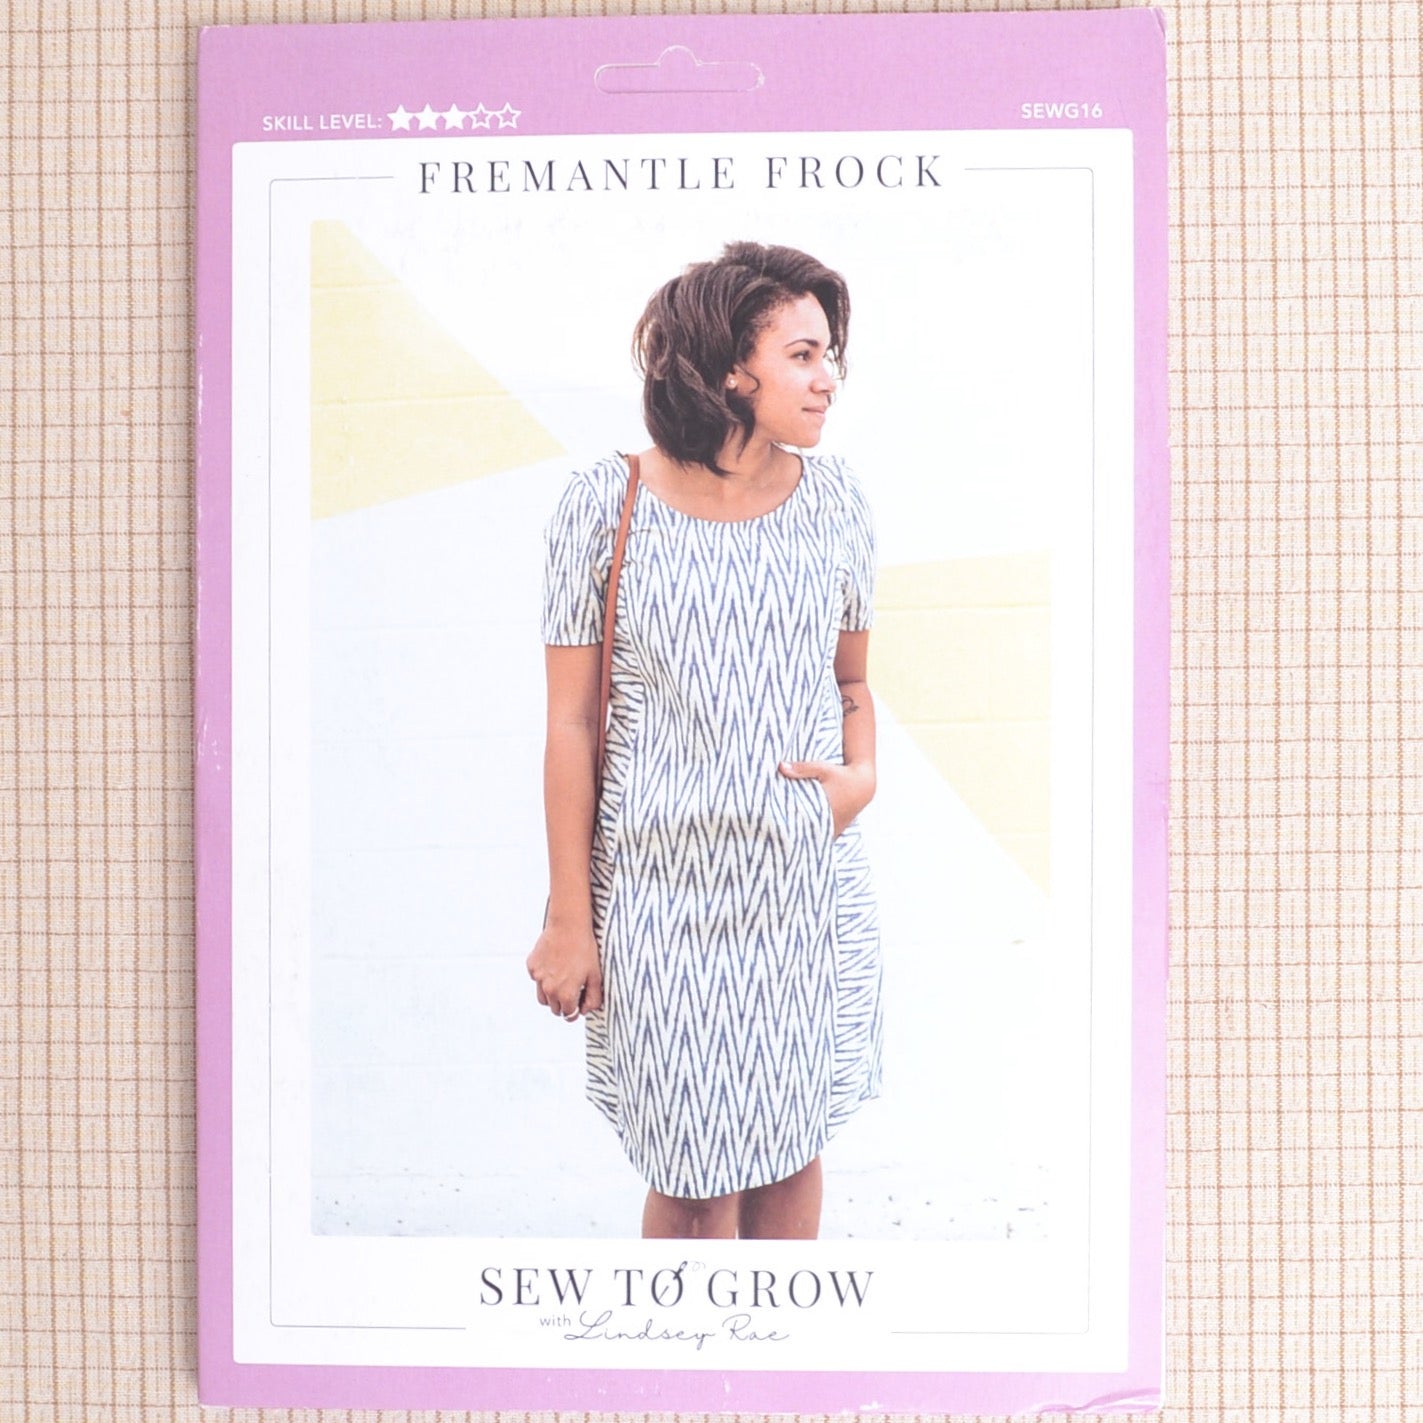 Freemantle Frock dress pattern from Sew to Grow pattterns